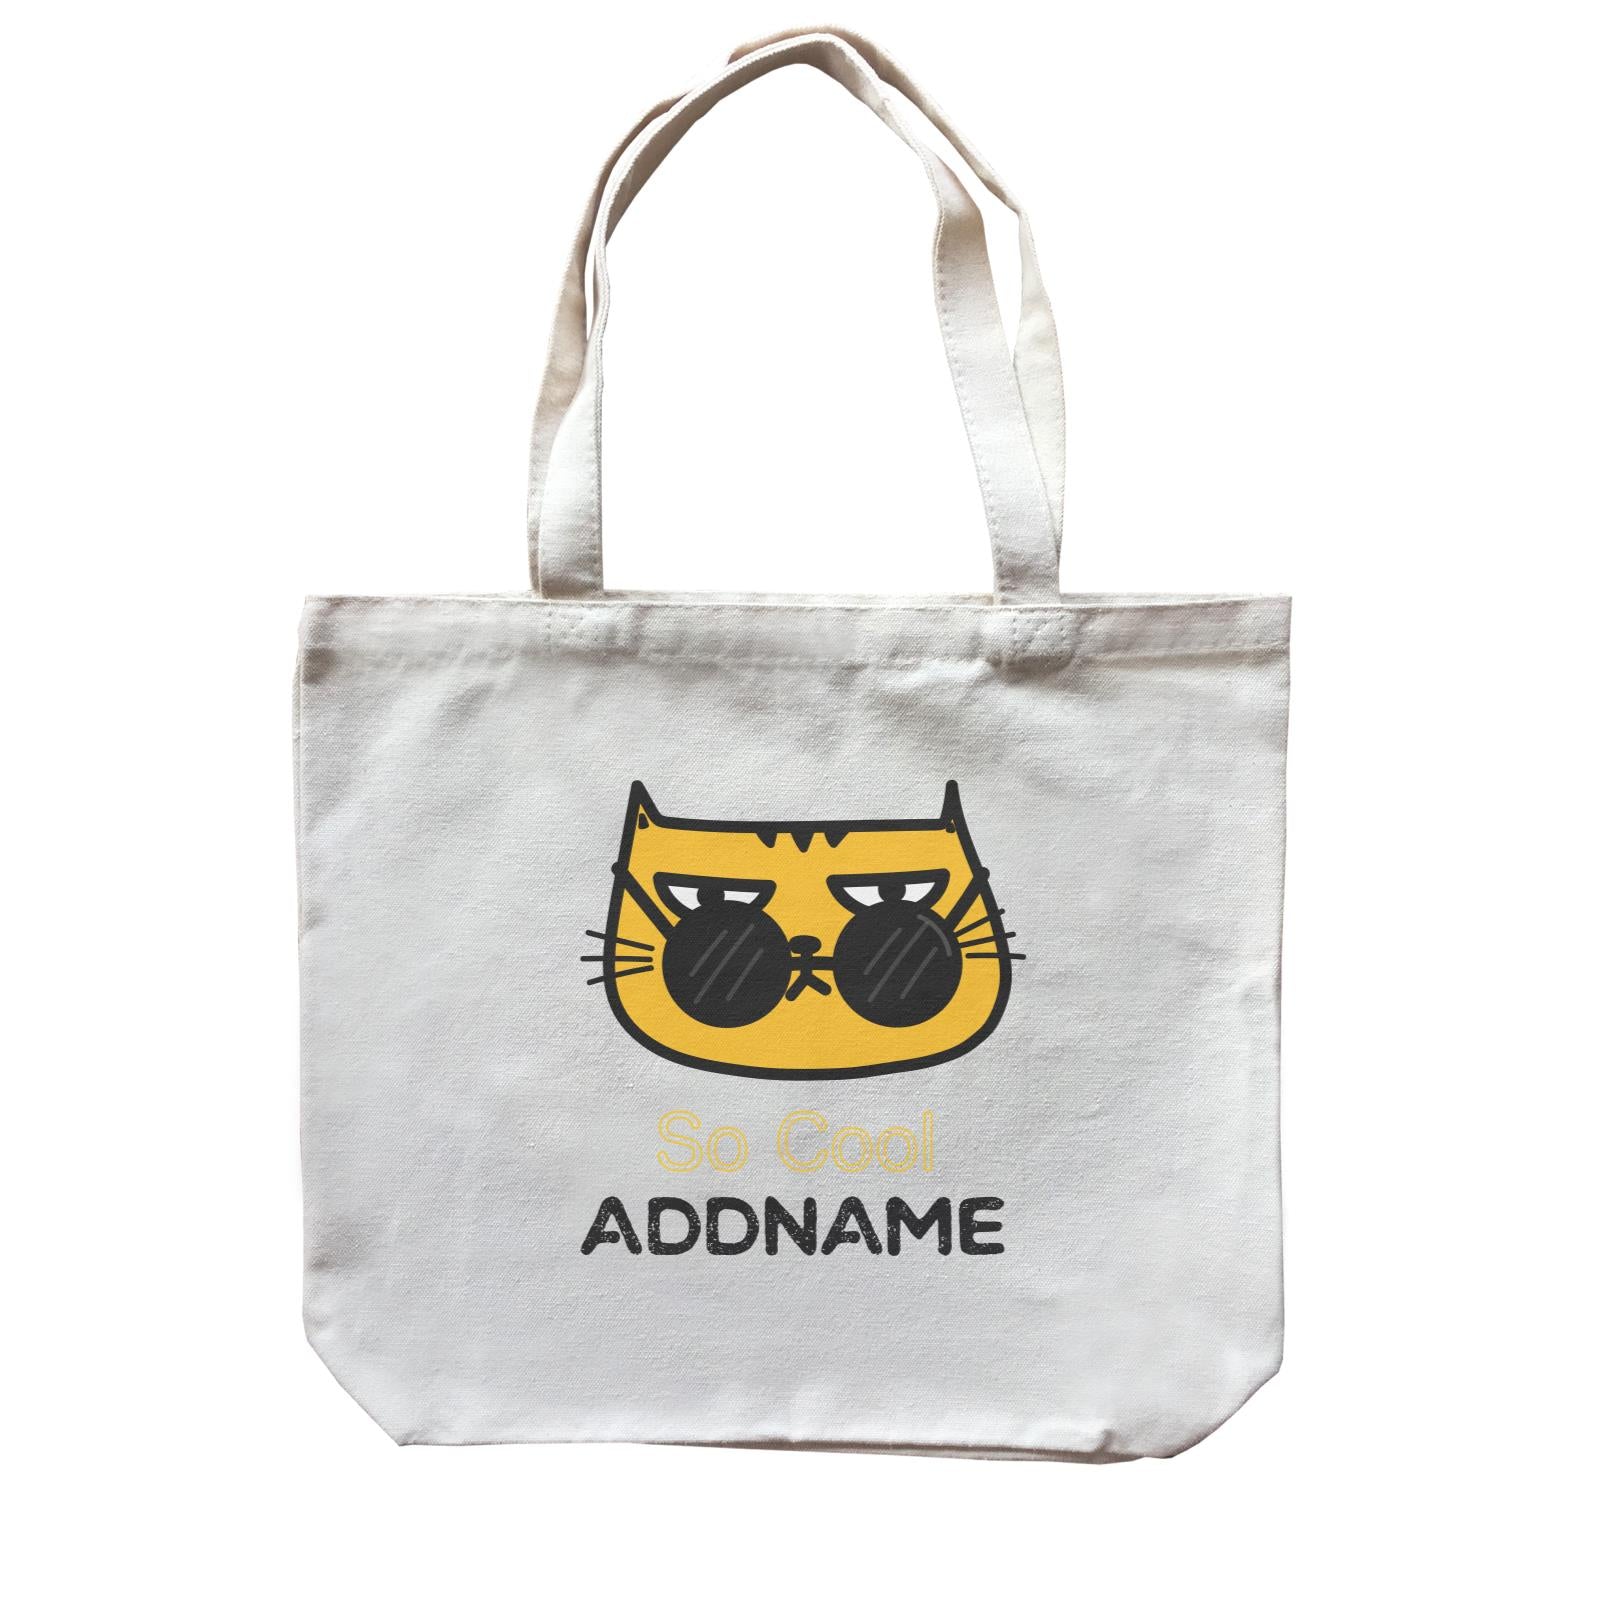 Cute Animals And Friends Series Cool Cat With Sunglasses Addname Canvas Bag